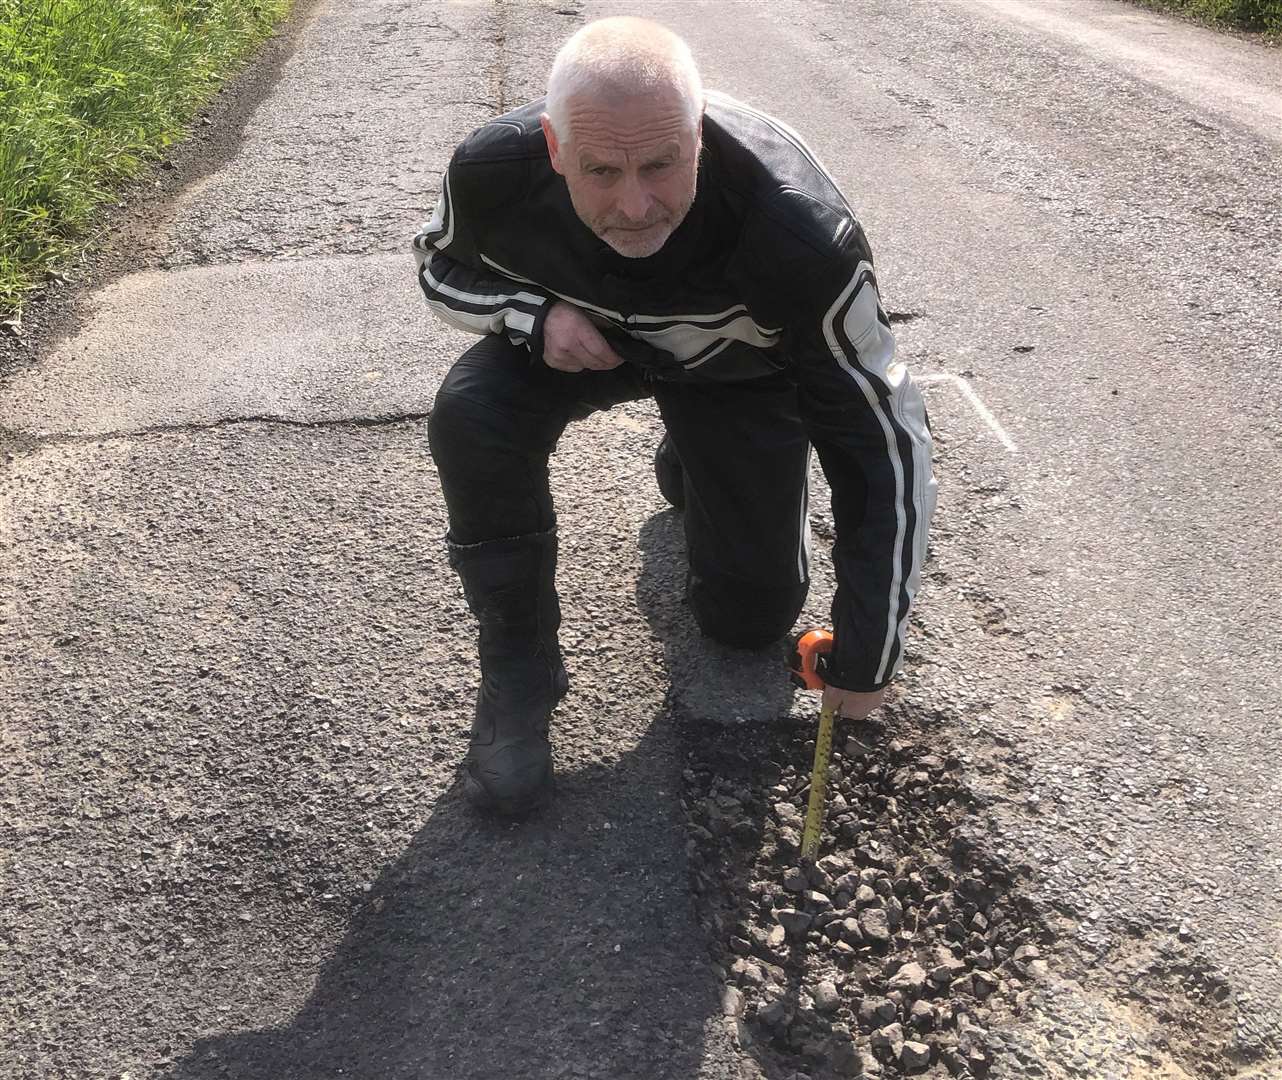 Steve Matthews wants more to be done to maintain rural roads to prevent potholes like the one on Monk's Hill in Smarden that caused £500 of damage to his bike